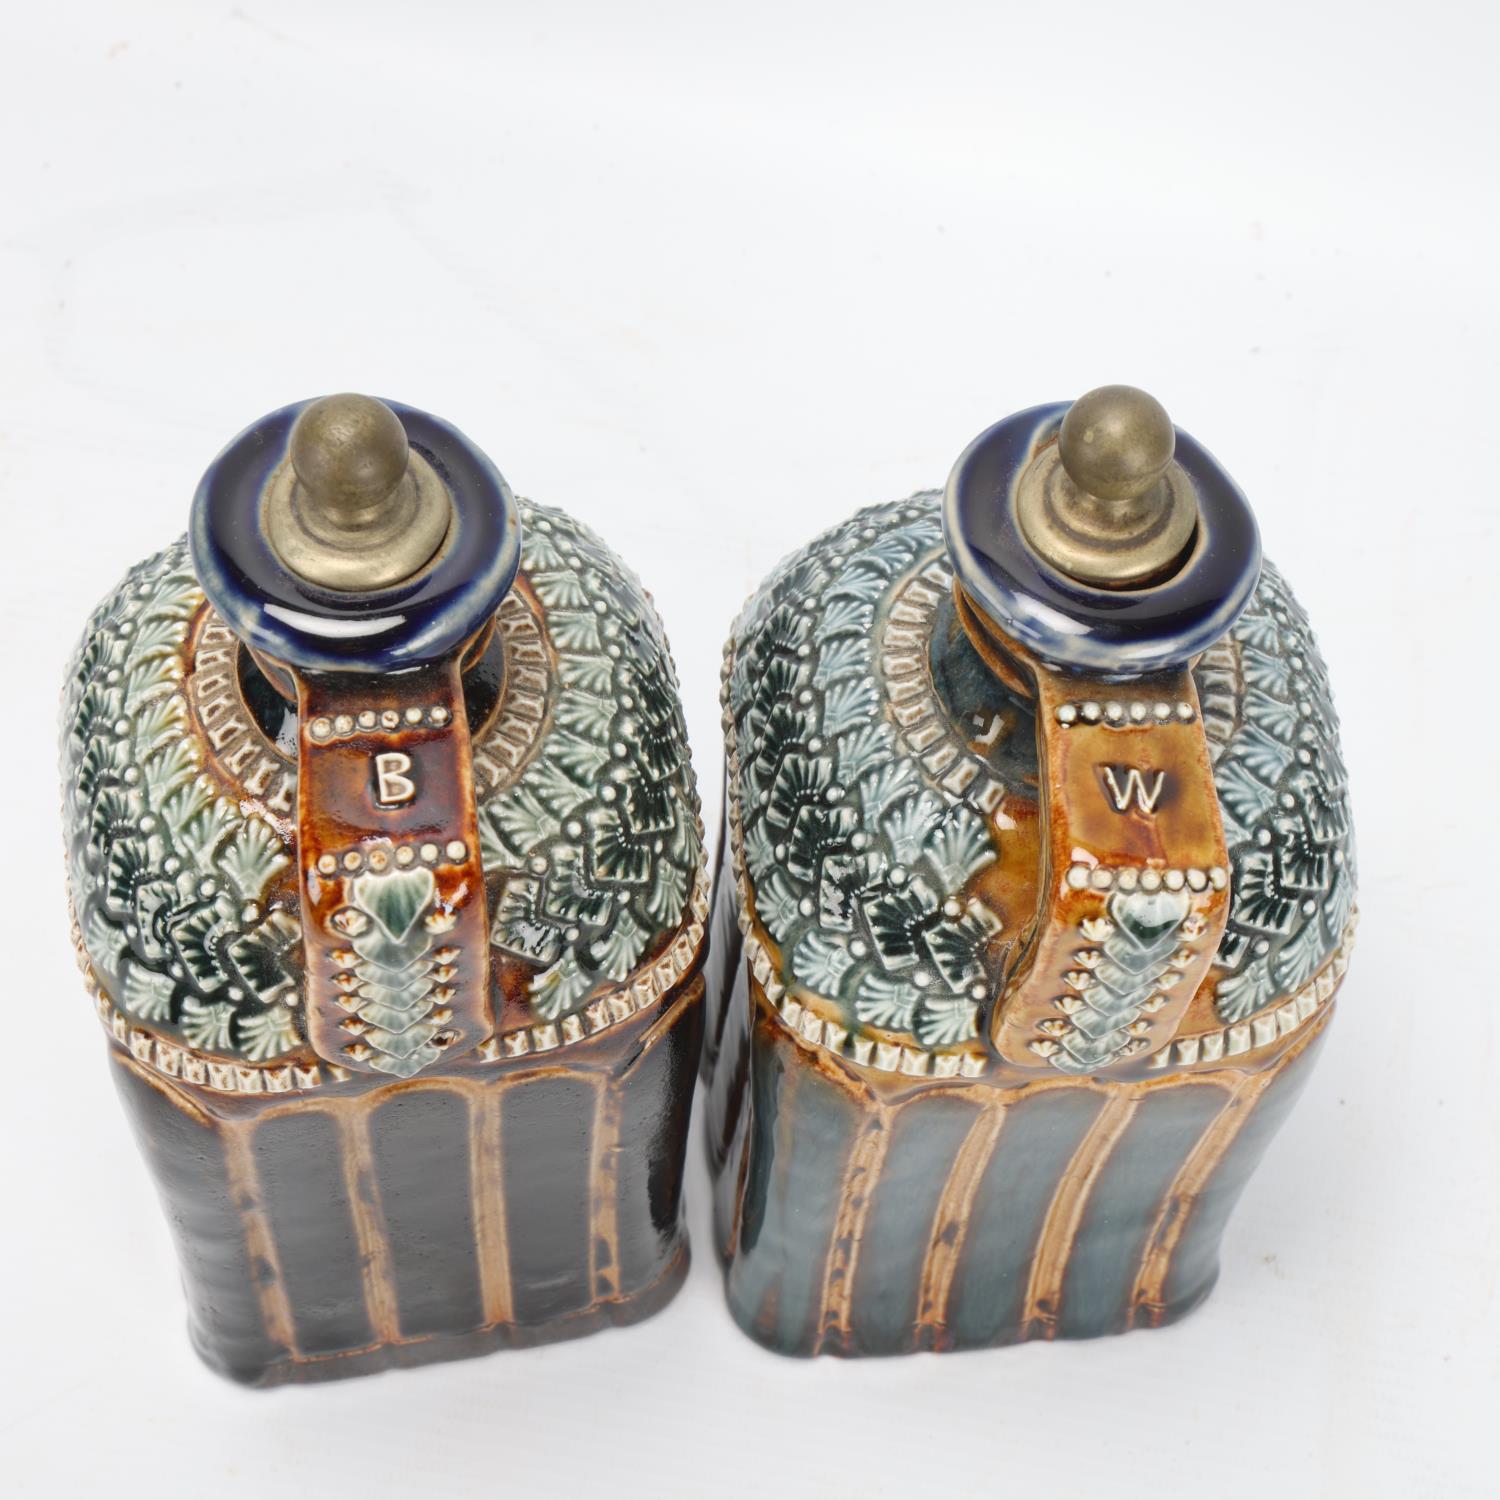 Pair of 19th century Doulton Lambeth stoneware Whisky and Brandy square section spirit flasks, - Image 2 of 3